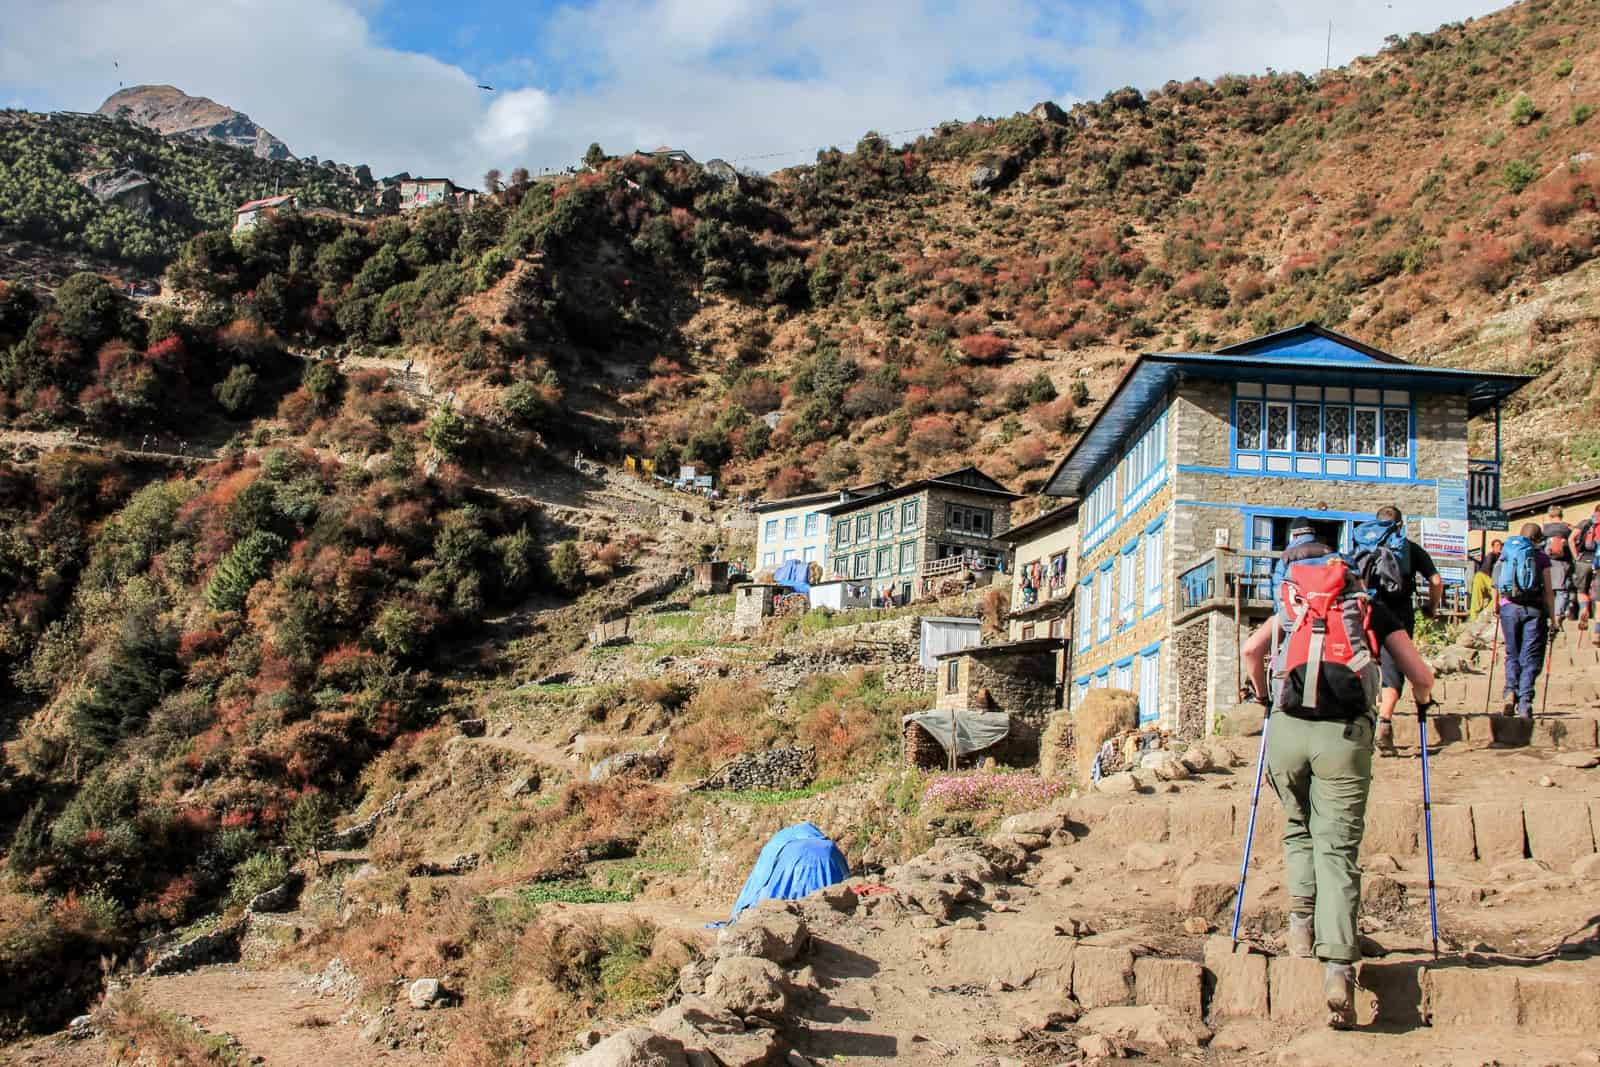 Three trekkers on an uphill climb on a steep worn trail past small huts on a orange rocky mountain face